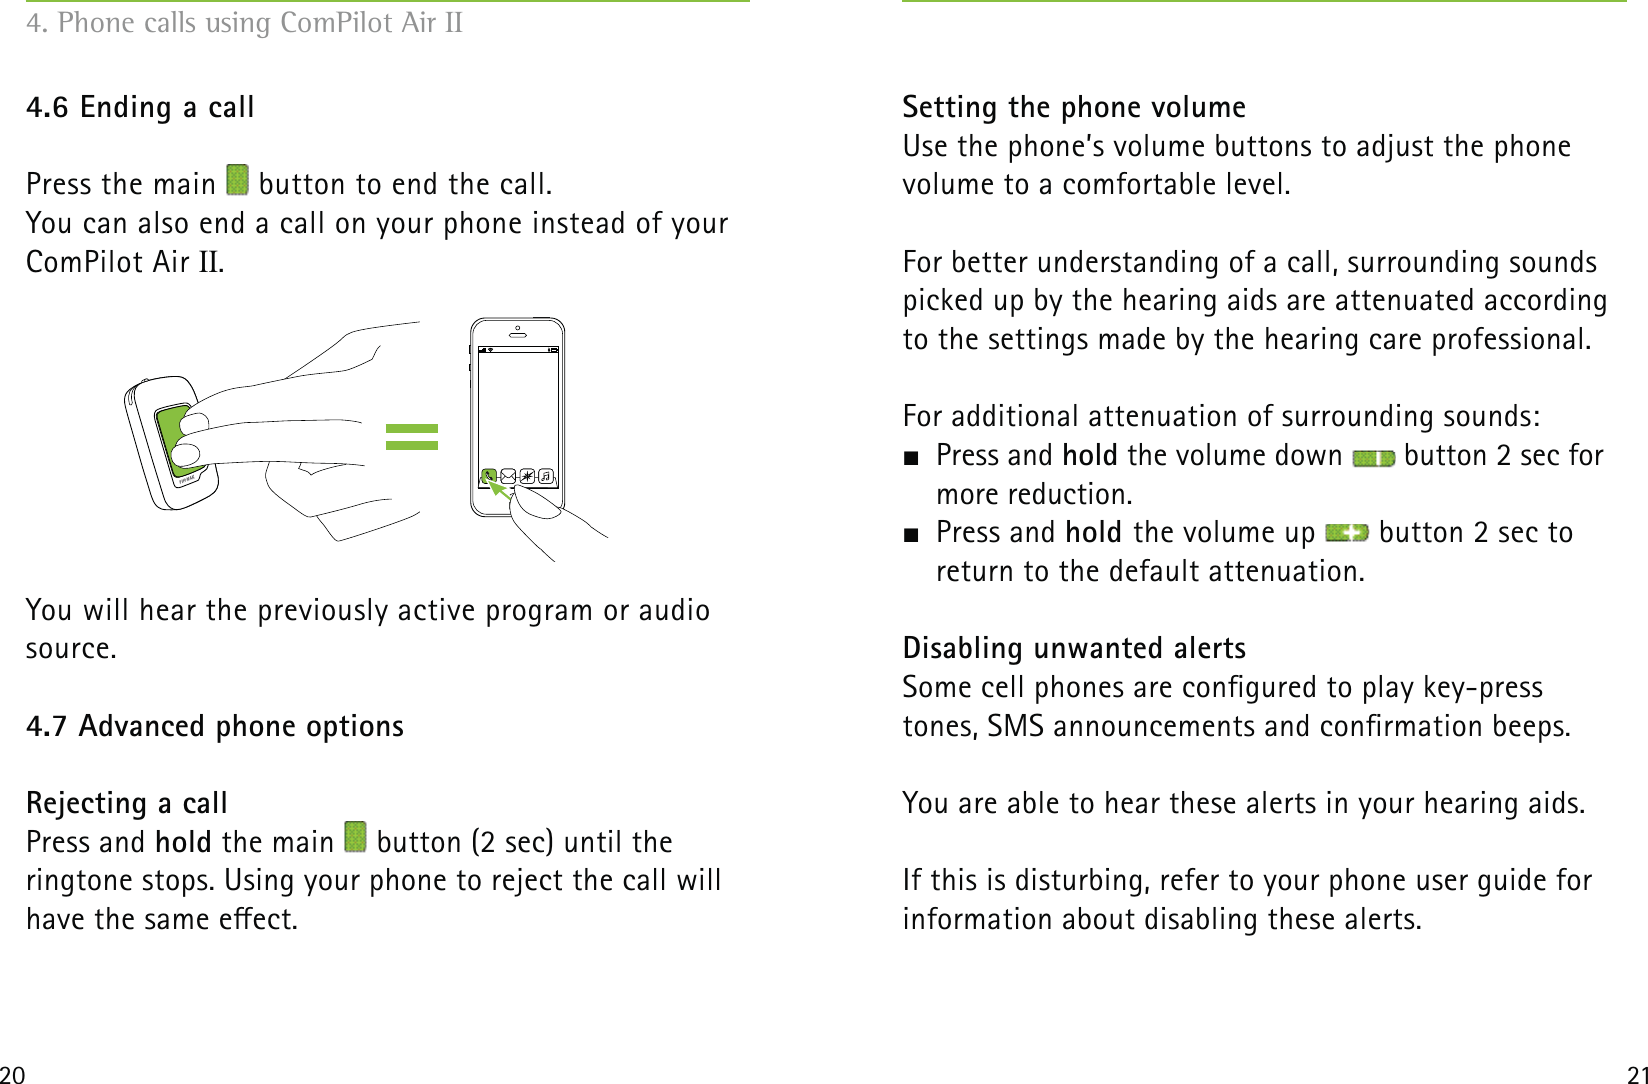 20 214.6 Ending a callPress the main   button to end the call. You can also end a call on your phone instead of your ComPilot Air II.You will hear the previously active program or audio source.4.7 Advanced phone optionsRejecting a callPress and hold the main   button (2 sec) until the  ringtone stops. Using your phone to reject the call will have the same eect. Setting the phone volumeUse the phone’s volume buttons to adjust the phone  volume to a comfortable level.For better understanding of a call, surrounding sounds picked up by the hearing aids are attenuated according to the settings made by the hearing care professional.For additional attenuation of surrounding sounds: Press and hold the volume down   button 2 sec for more reduction. Press and hold the volume up   button 2 sec to  return to the default attenuation.Disabling unwanted alertsSome cell phones are congured to play key-press tones, SMS announcements and conrmation beeps.You are able to hear these alerts in your hearing aids.If this is disturbing, refer to your phone user guide for information about disabling these alerts.4. Phone calls using ComPilot Air II